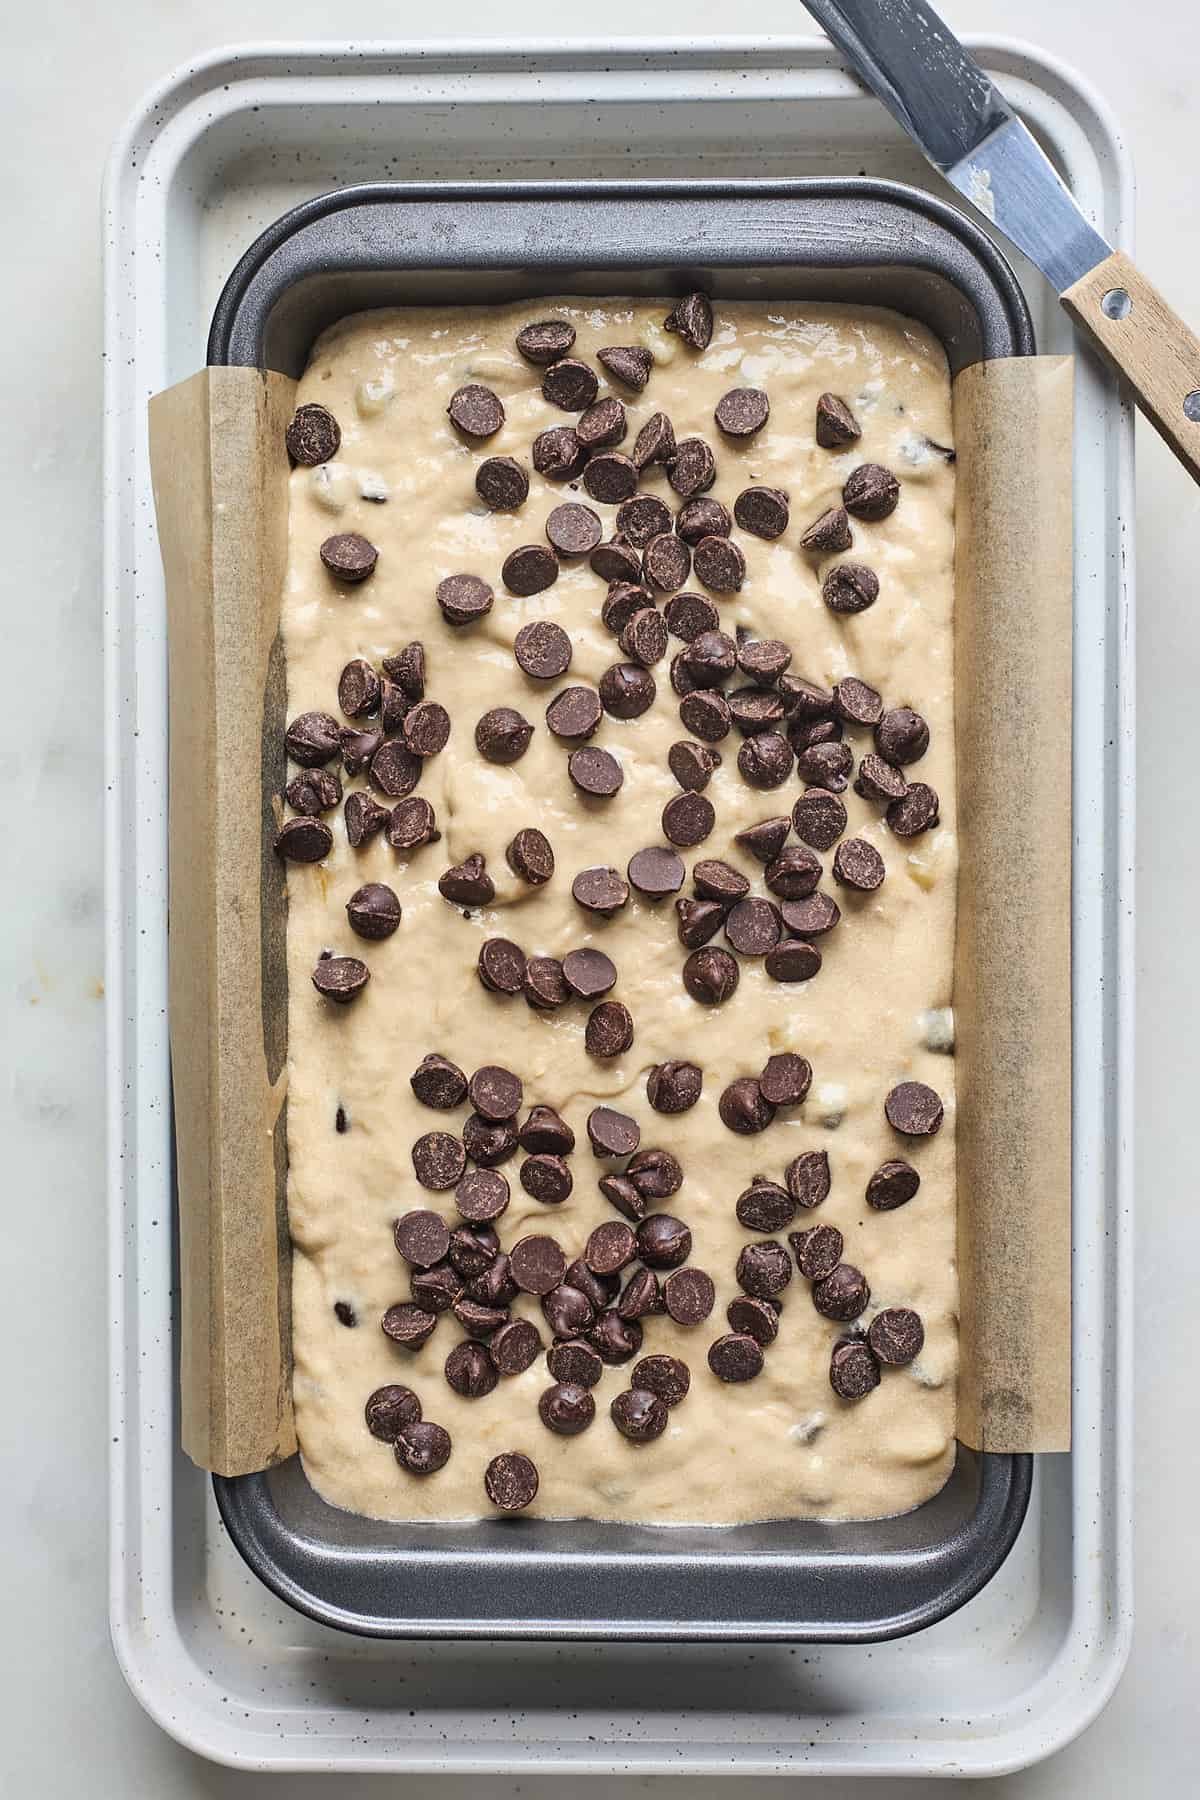 Banana bread batter in a loaf pan with chocolate chips on top